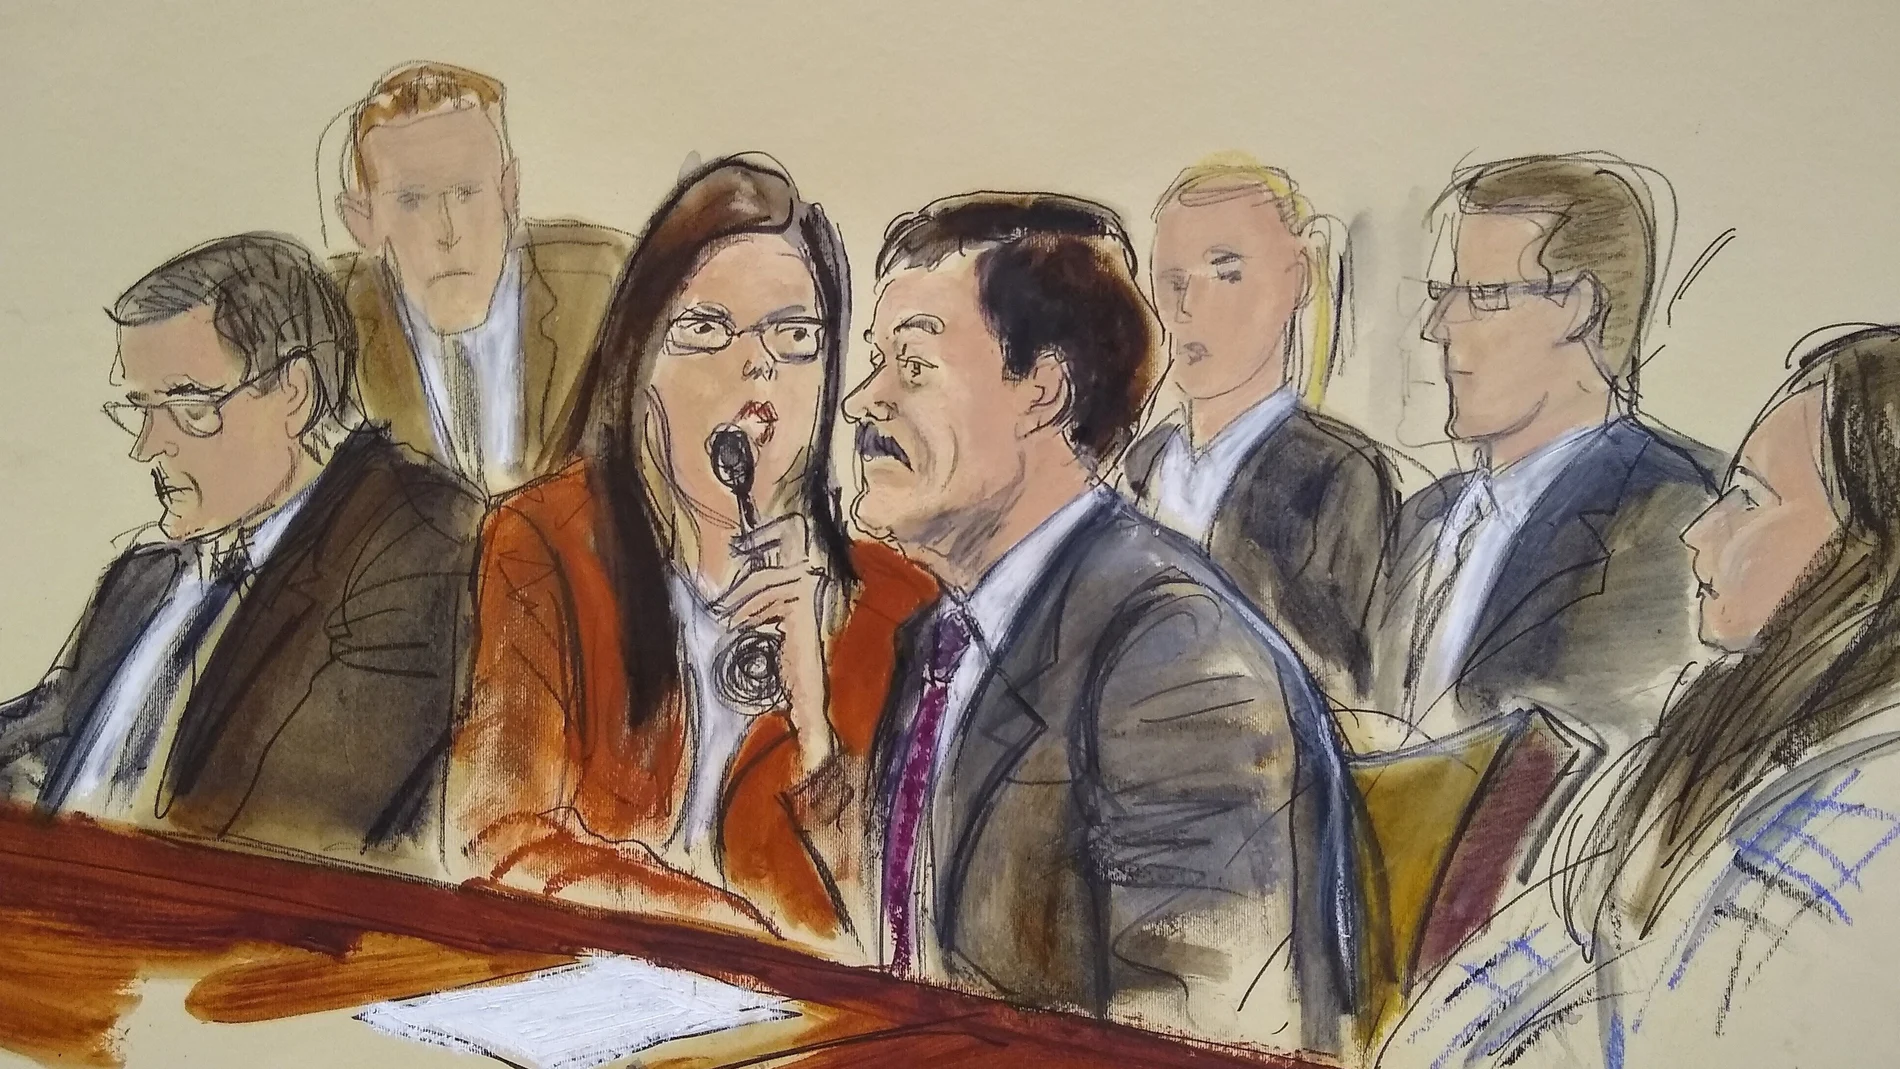 FILE - In this July 17, 2019 file photo of a courtroom sketch, Joaquin "El Chapo" Guzman, second from right, listens to his sentence via interpreter while surrounded by U.S. Marshals and flanked by his defense attorney Marc Fernich, during his sentencing in federal court in New York. Lawyers for the Mexican drug kingpin, who was convicted in February 2019 on multiple conspiracy counts in an epic drug-trafficking case and was sentenced to life behind bars in a U.S. prison, are appealing on Oct. 25, 2021 in hopes of overturning his life sentence. (Elizabeth Williams via AP, File)